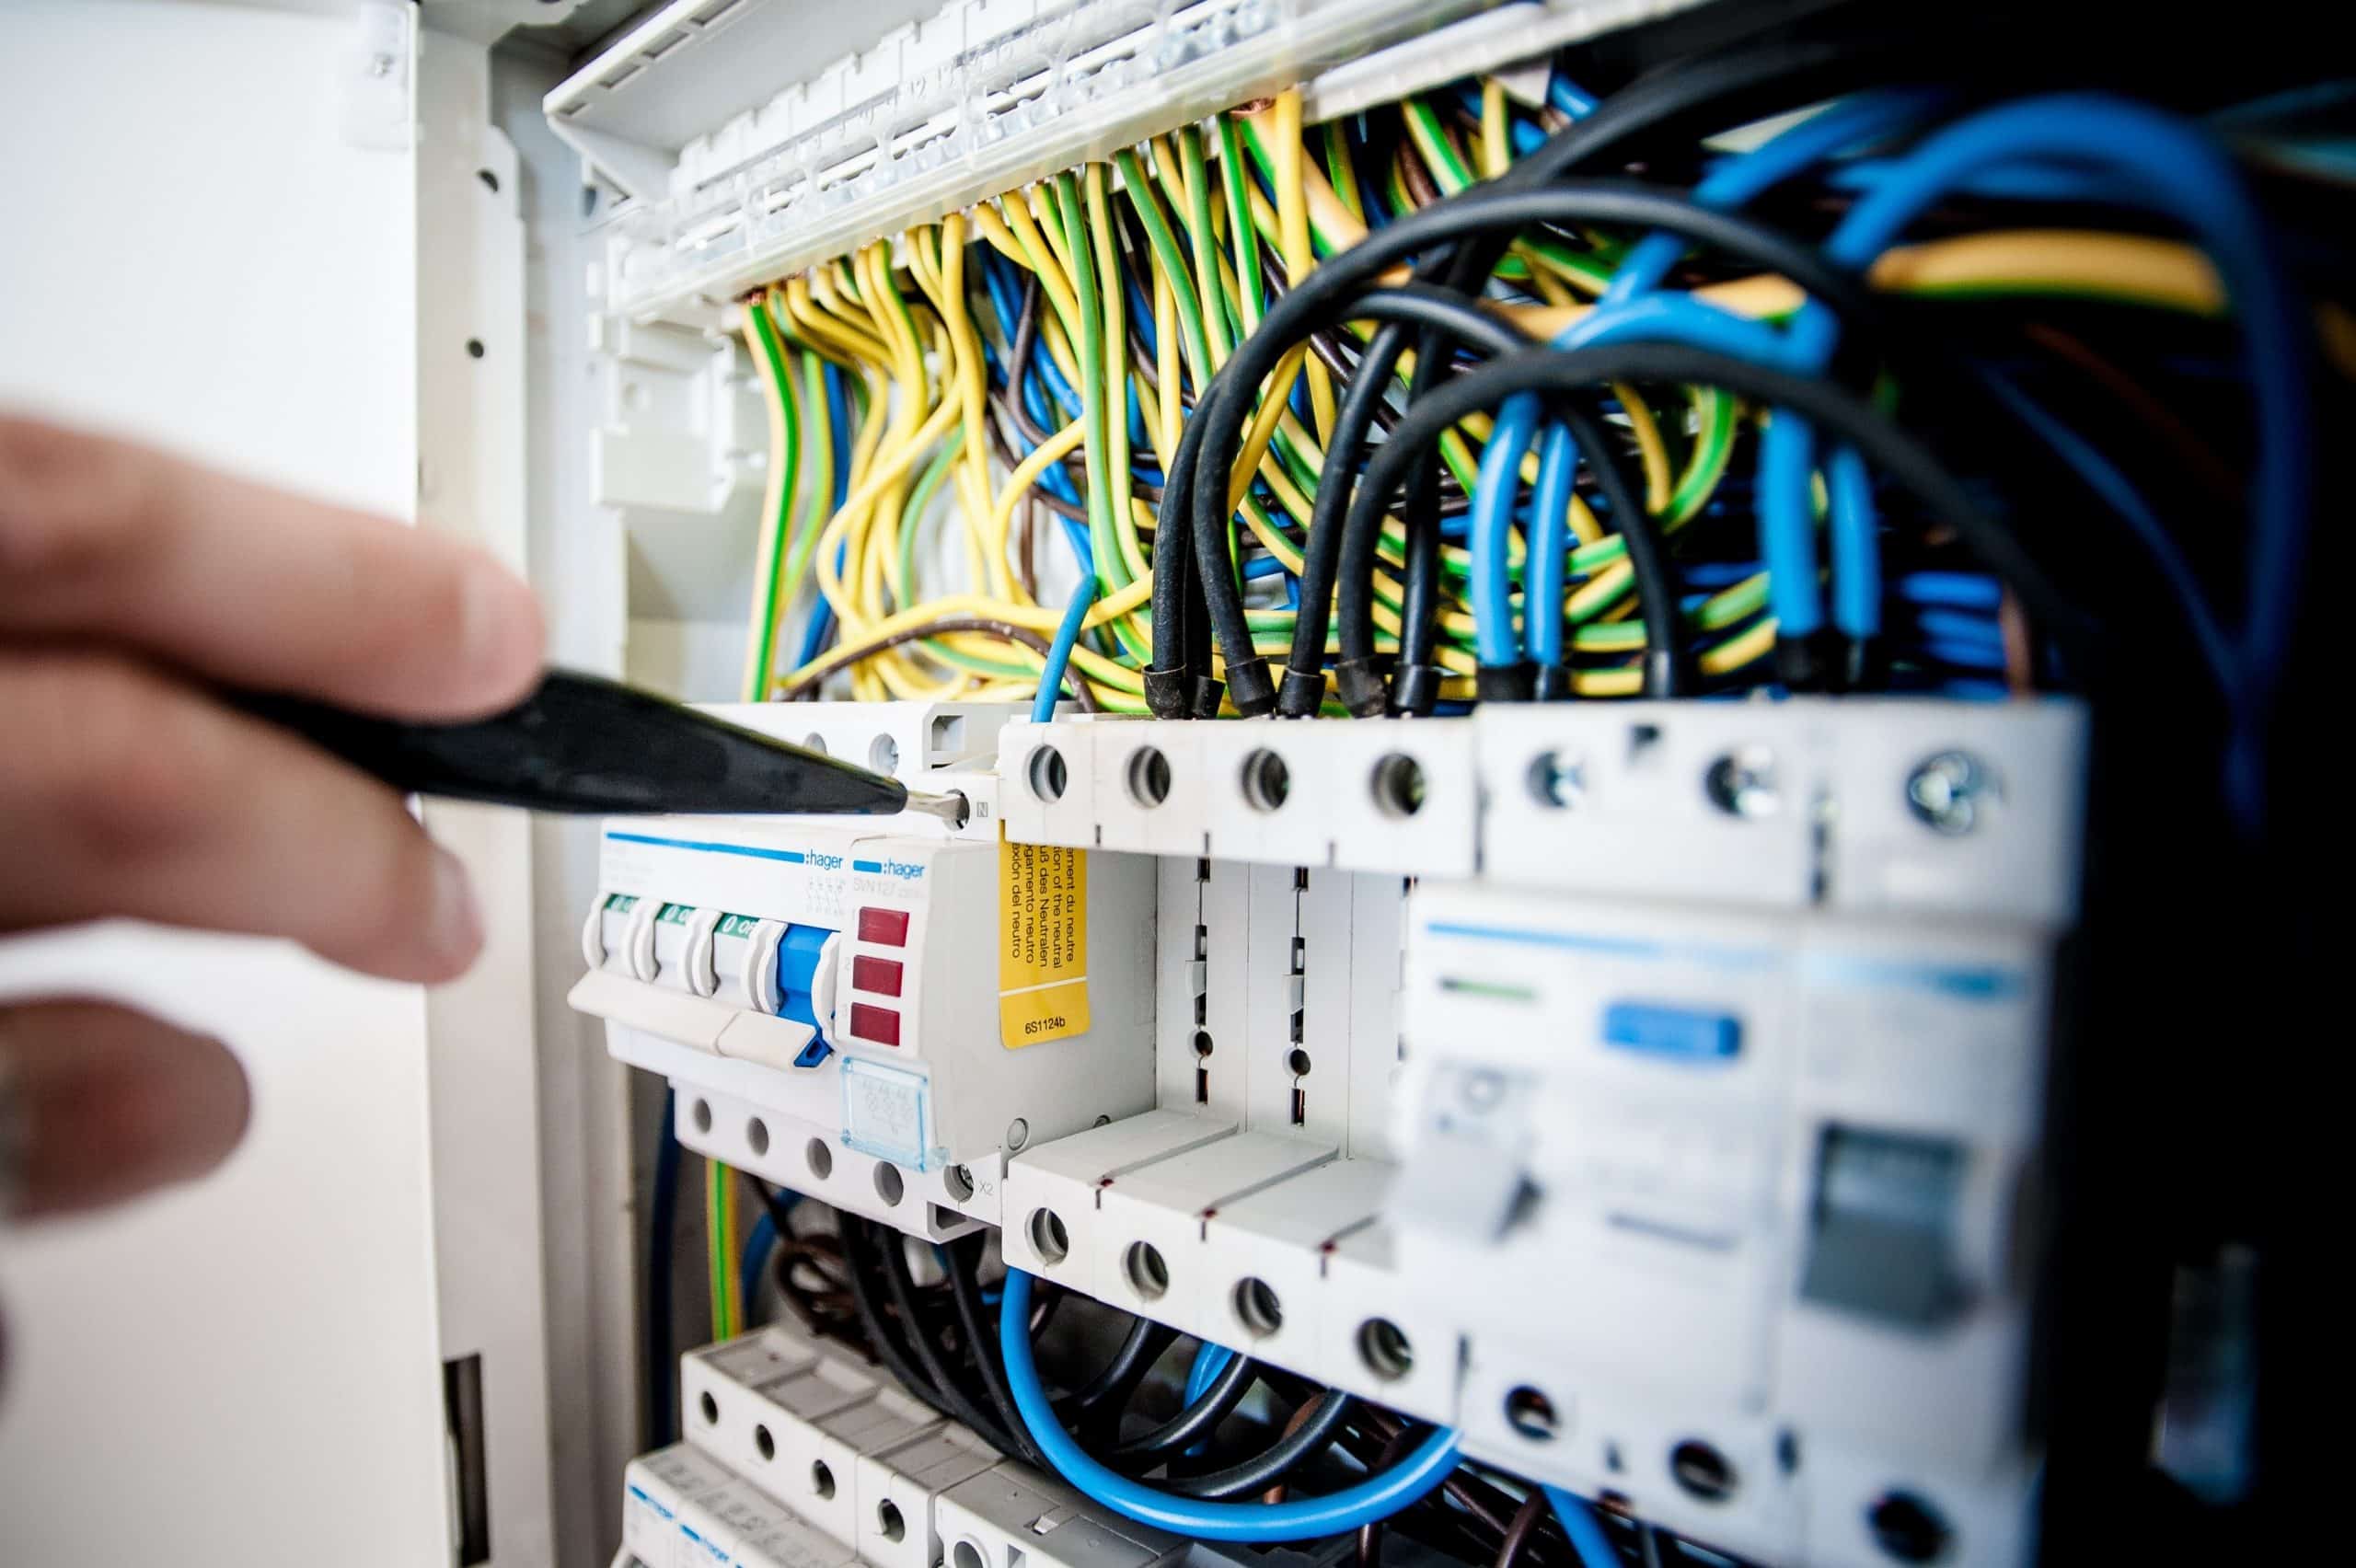 8 Best Electrical Engineering Courses & Certification [2021 AUGUST]